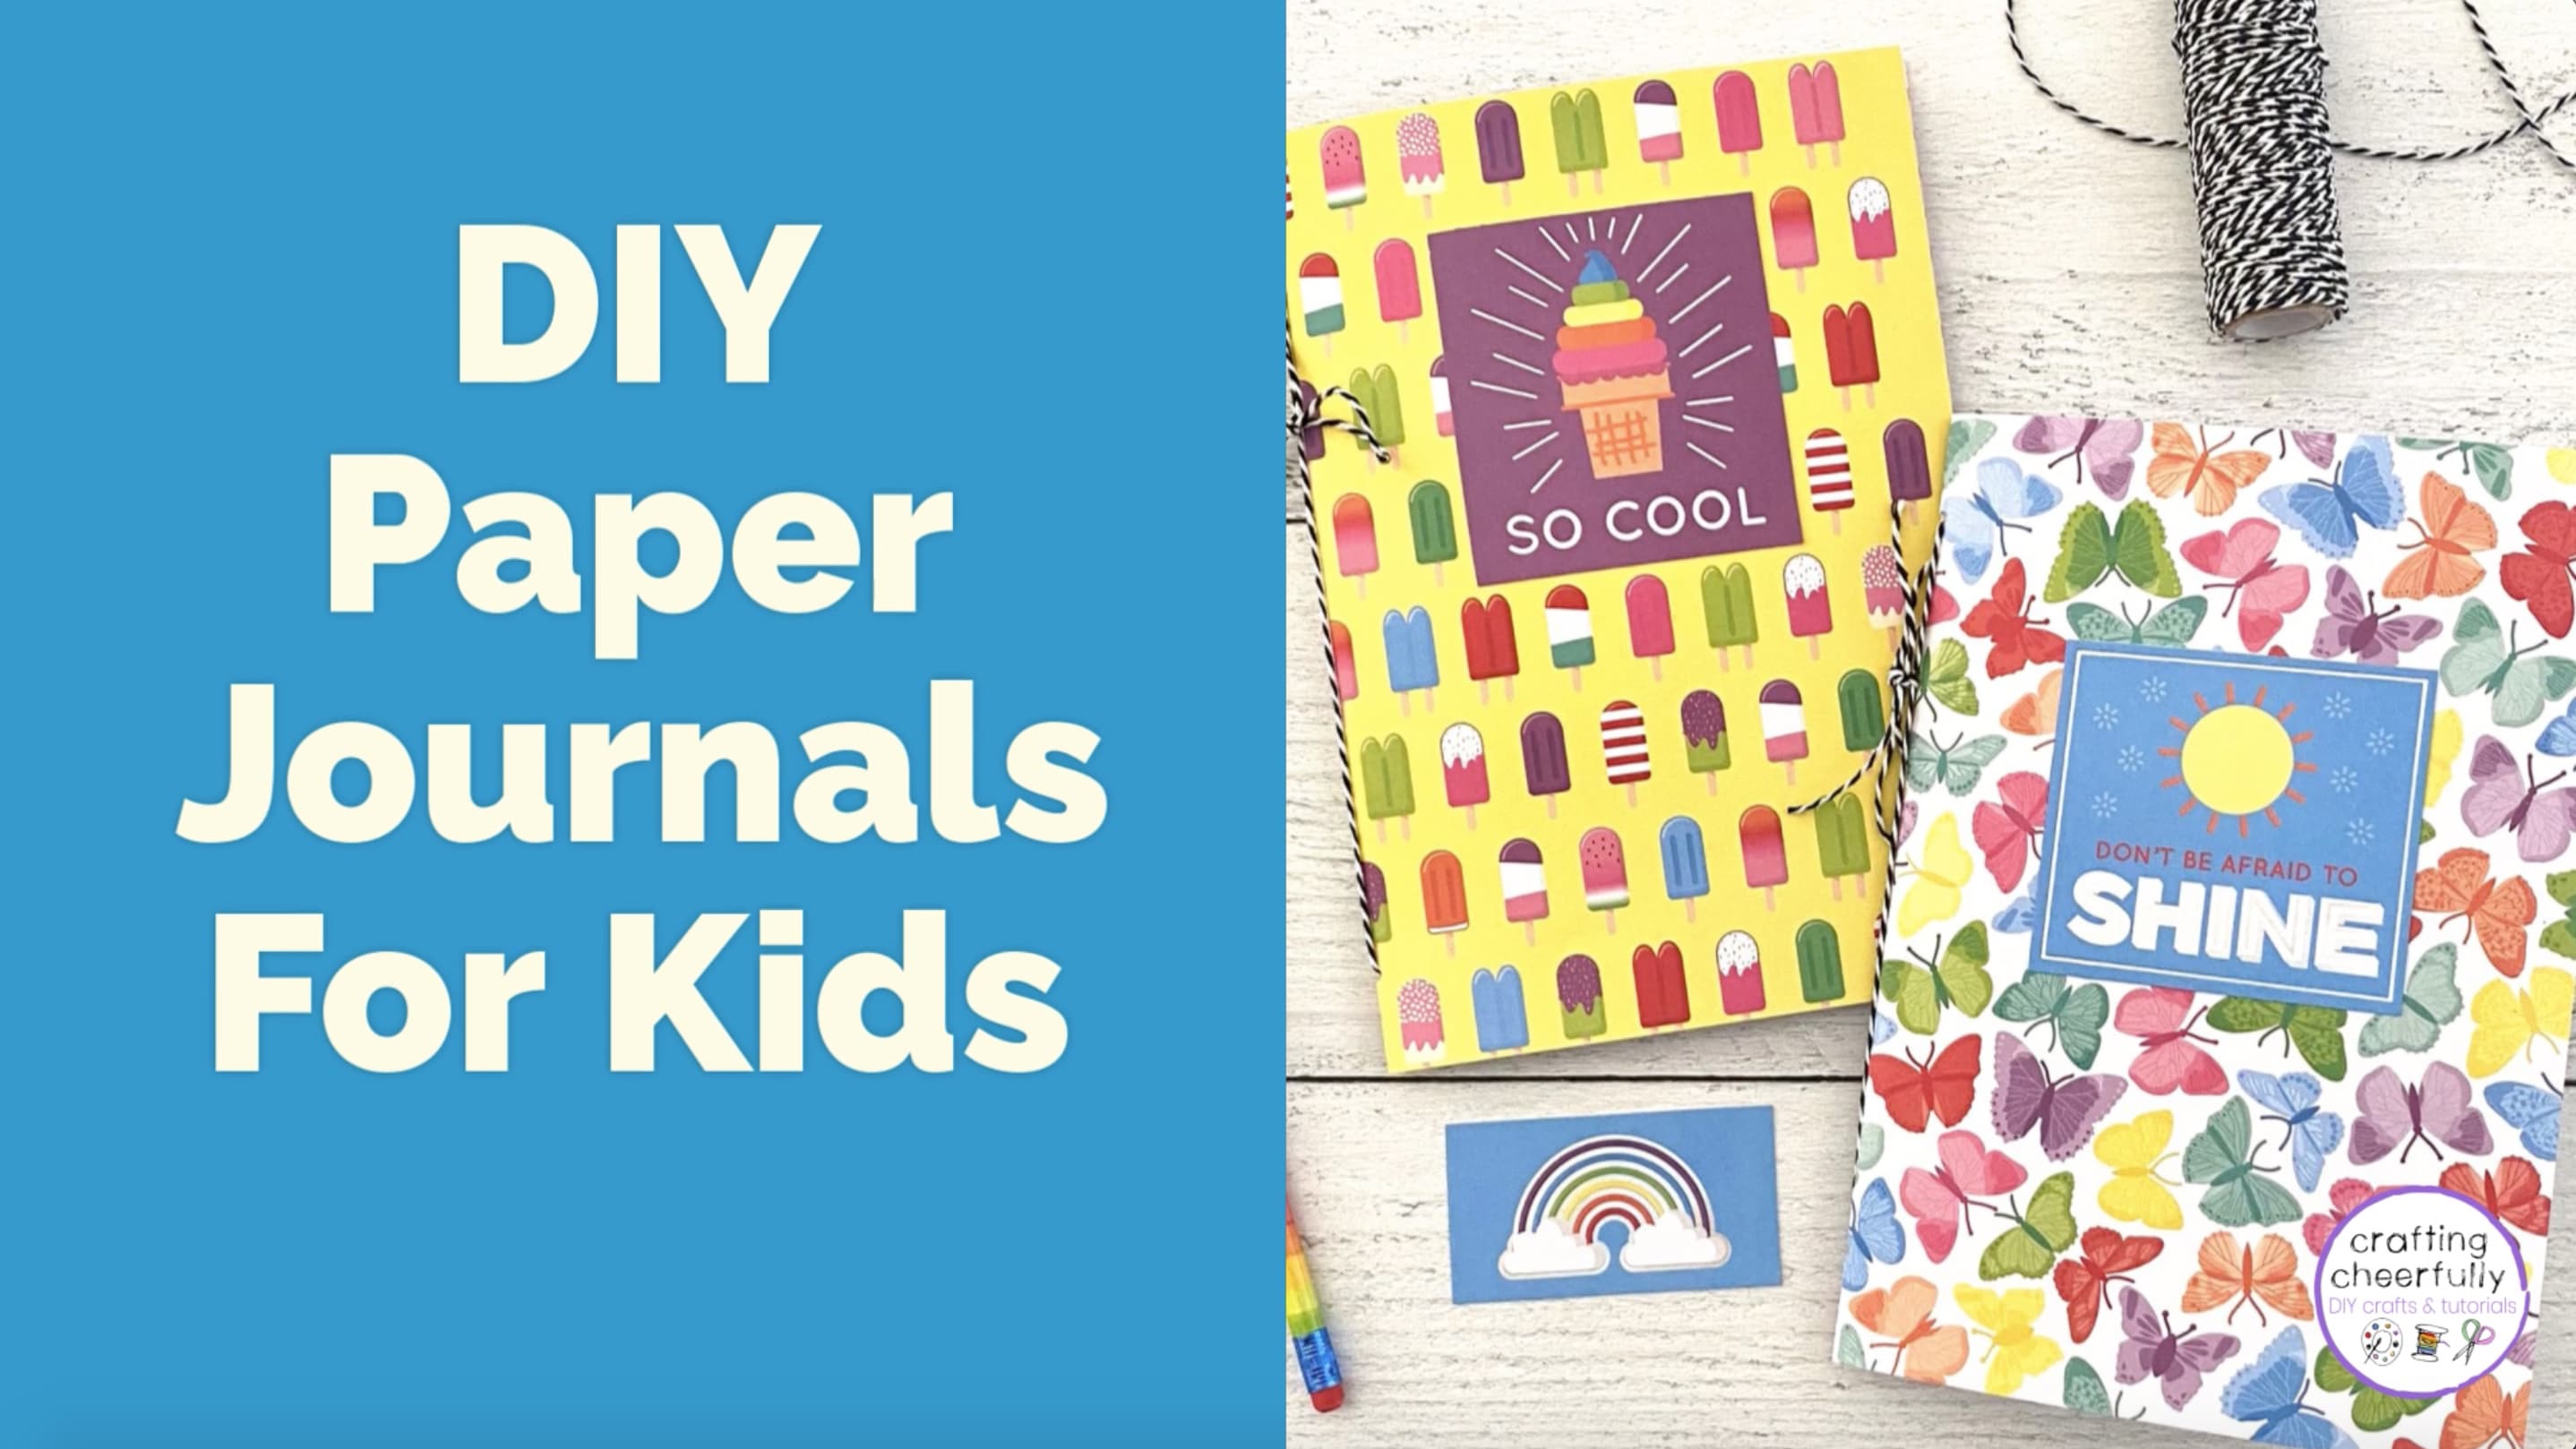 DIY Journal for Kids Using Scrapbook Paper - Crafting Cheerfully